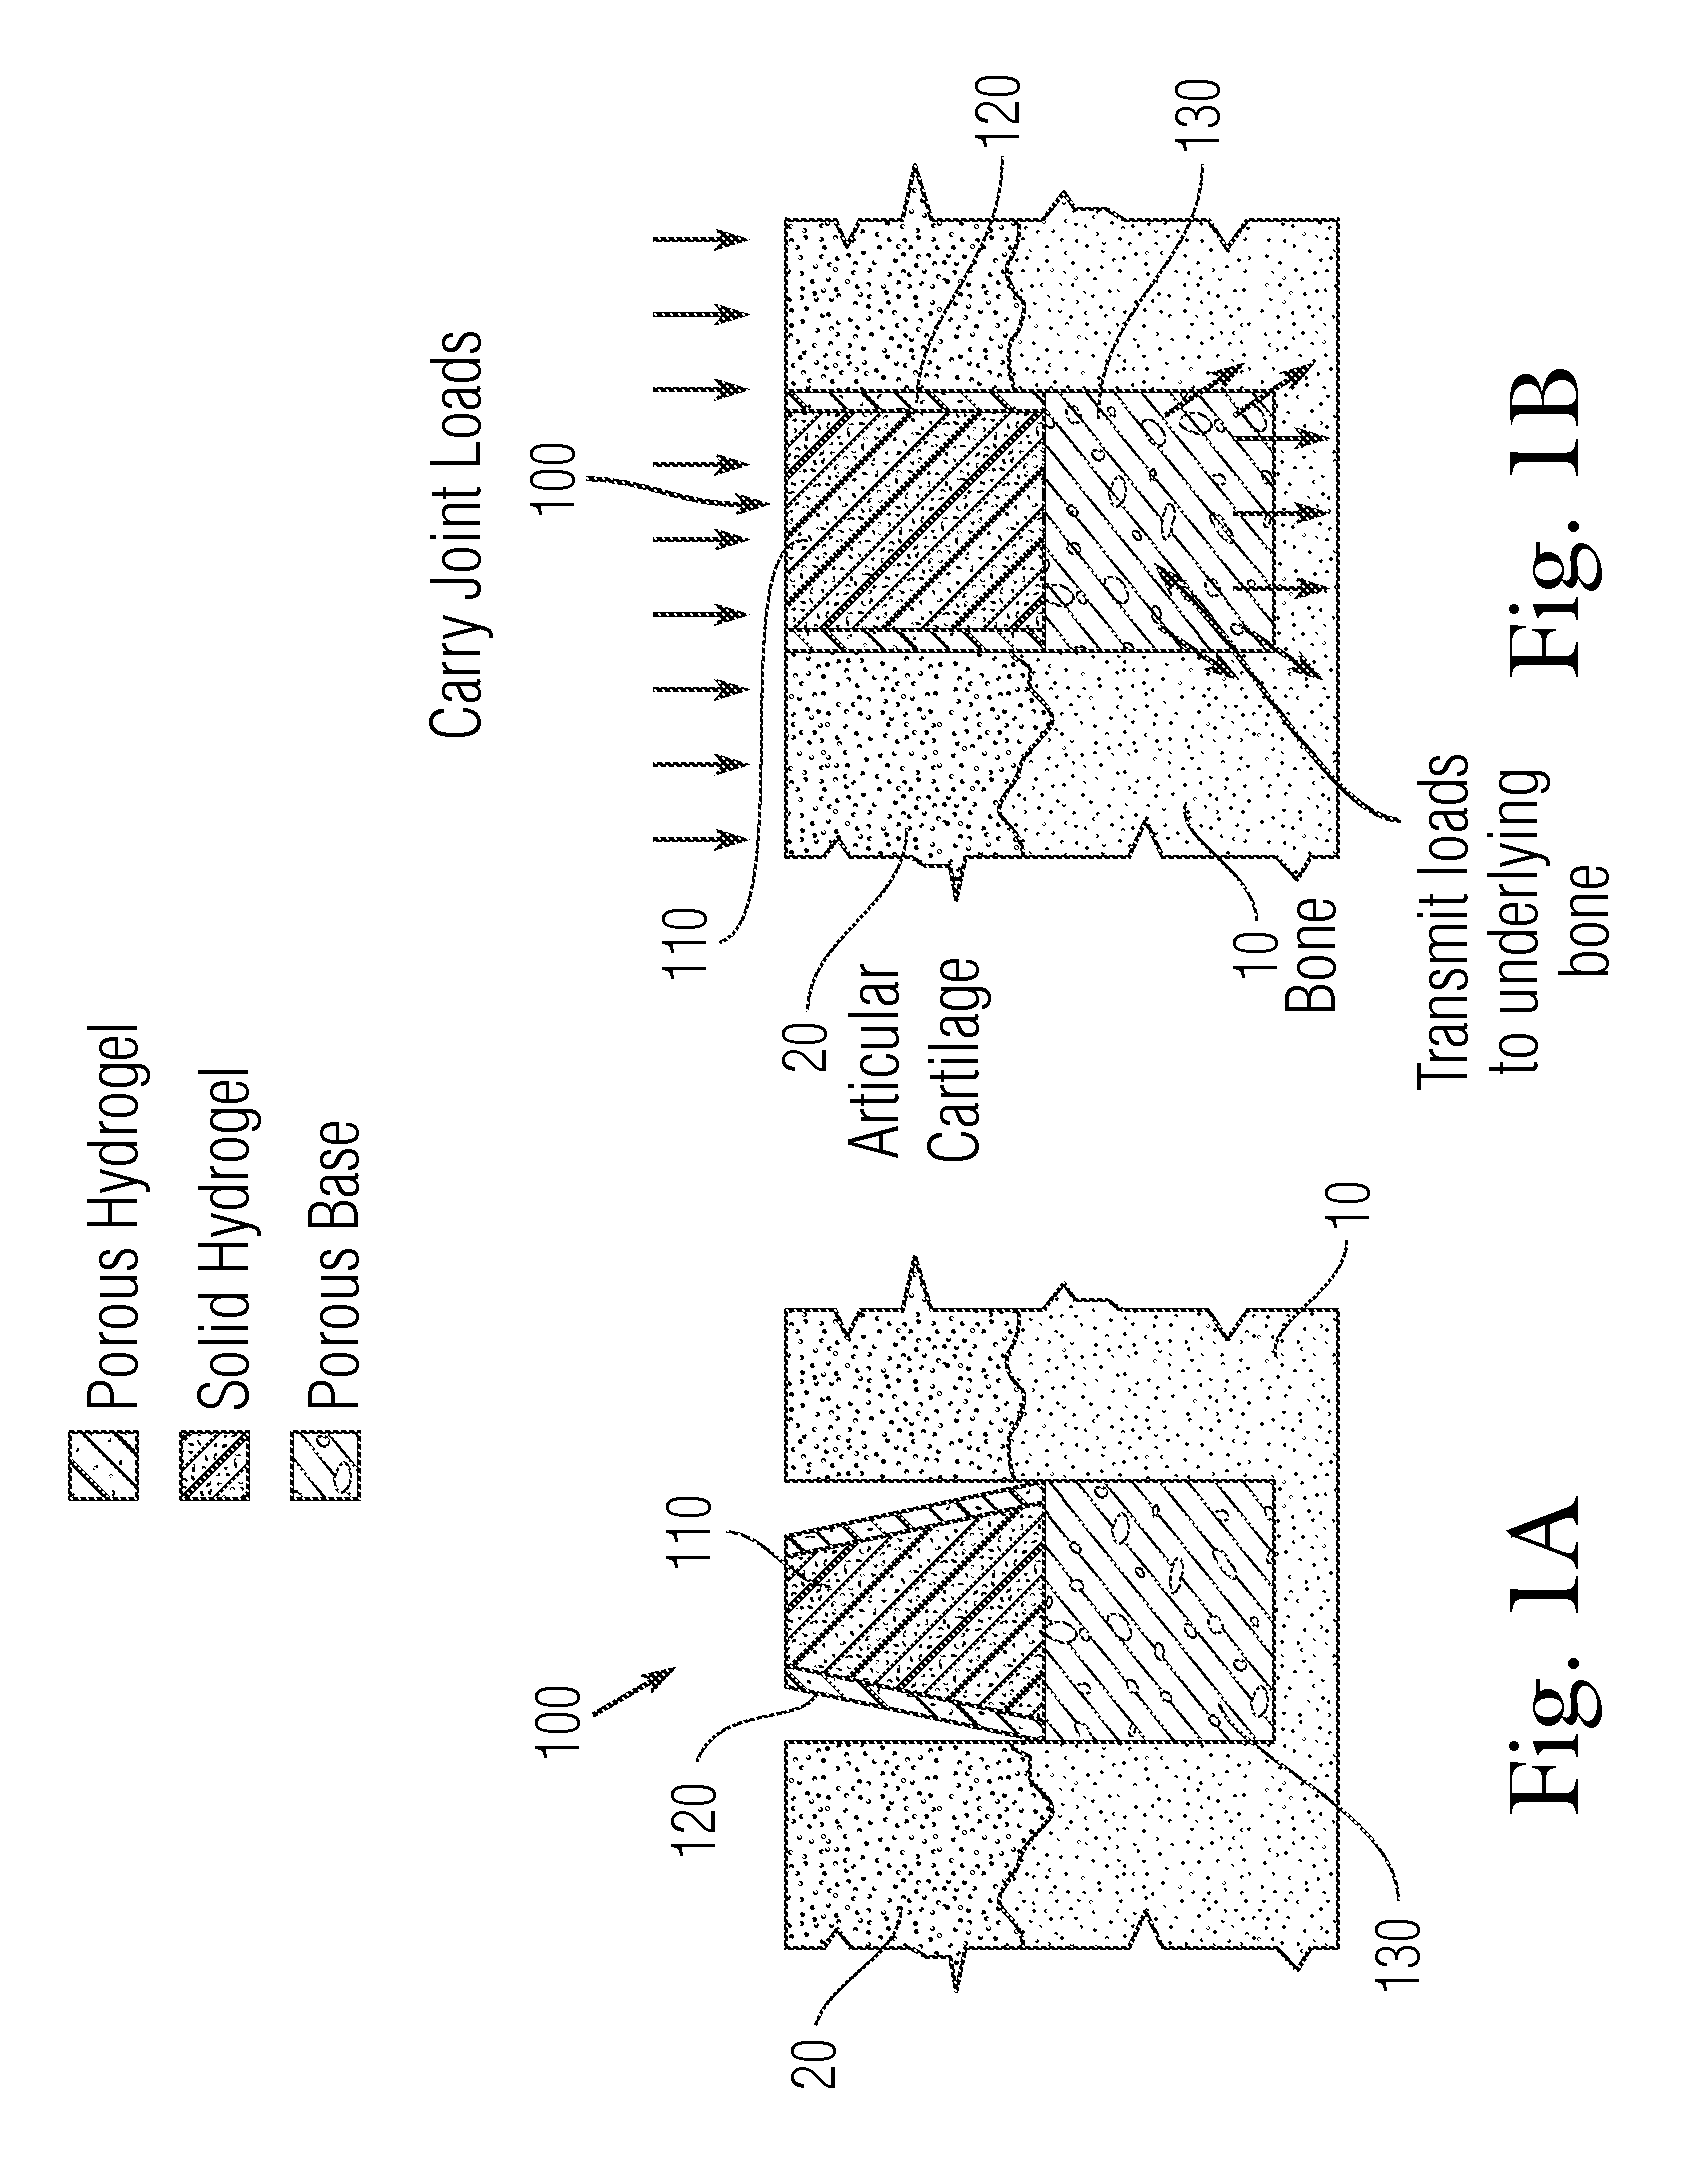 Multi-component non-biodegradable implant, a method of making and a method of implantation